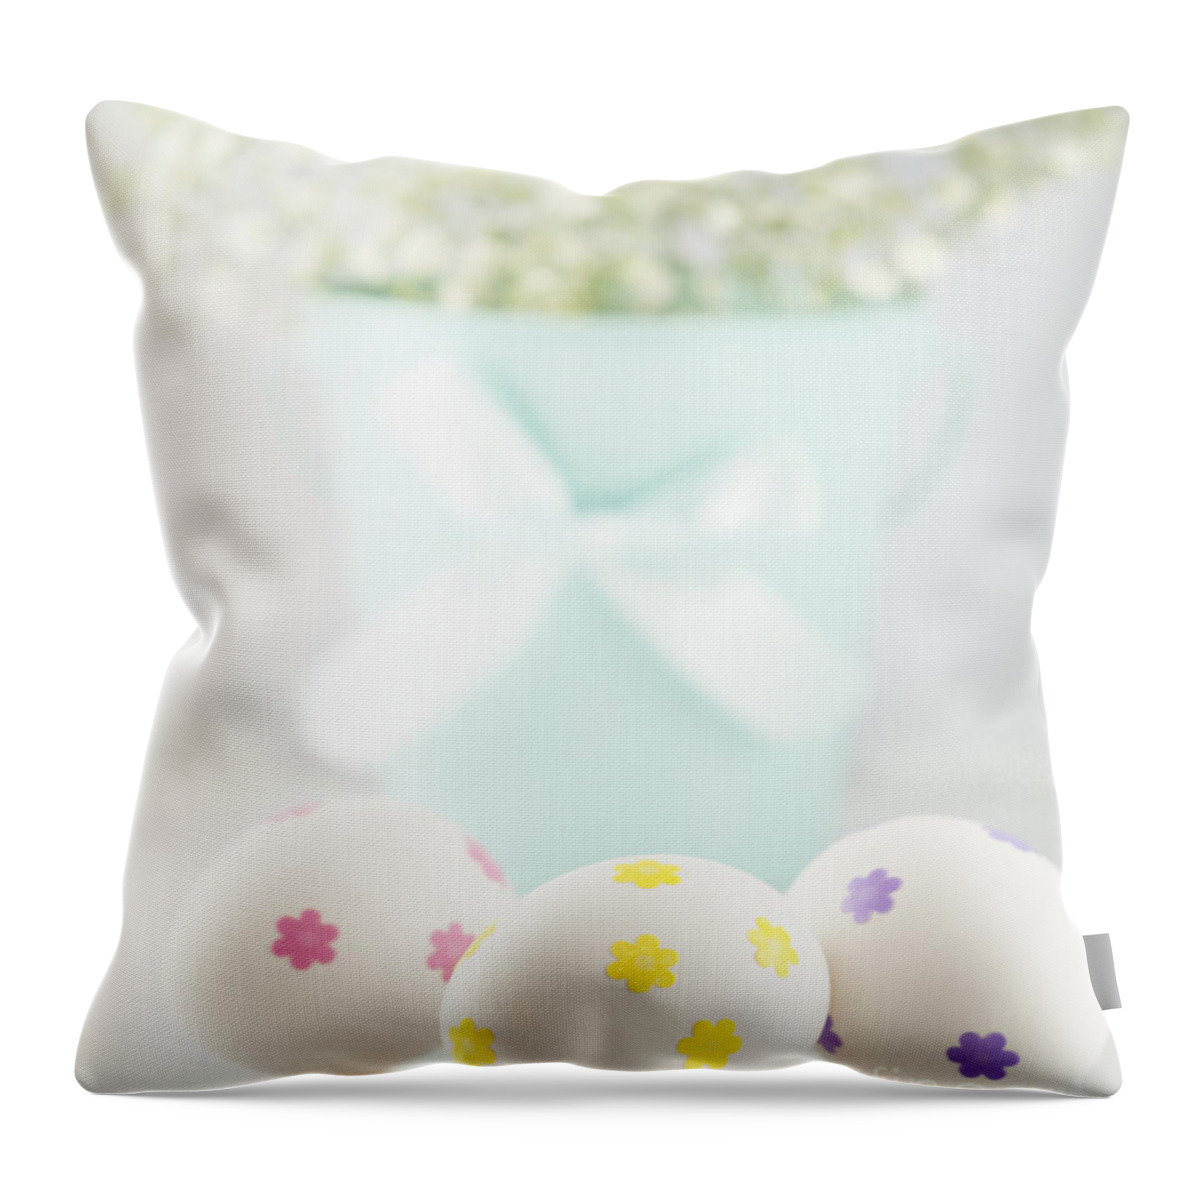 Baby's Breath Throw Pillow featuring the photograph Easter Eggs by Juli Scalzi